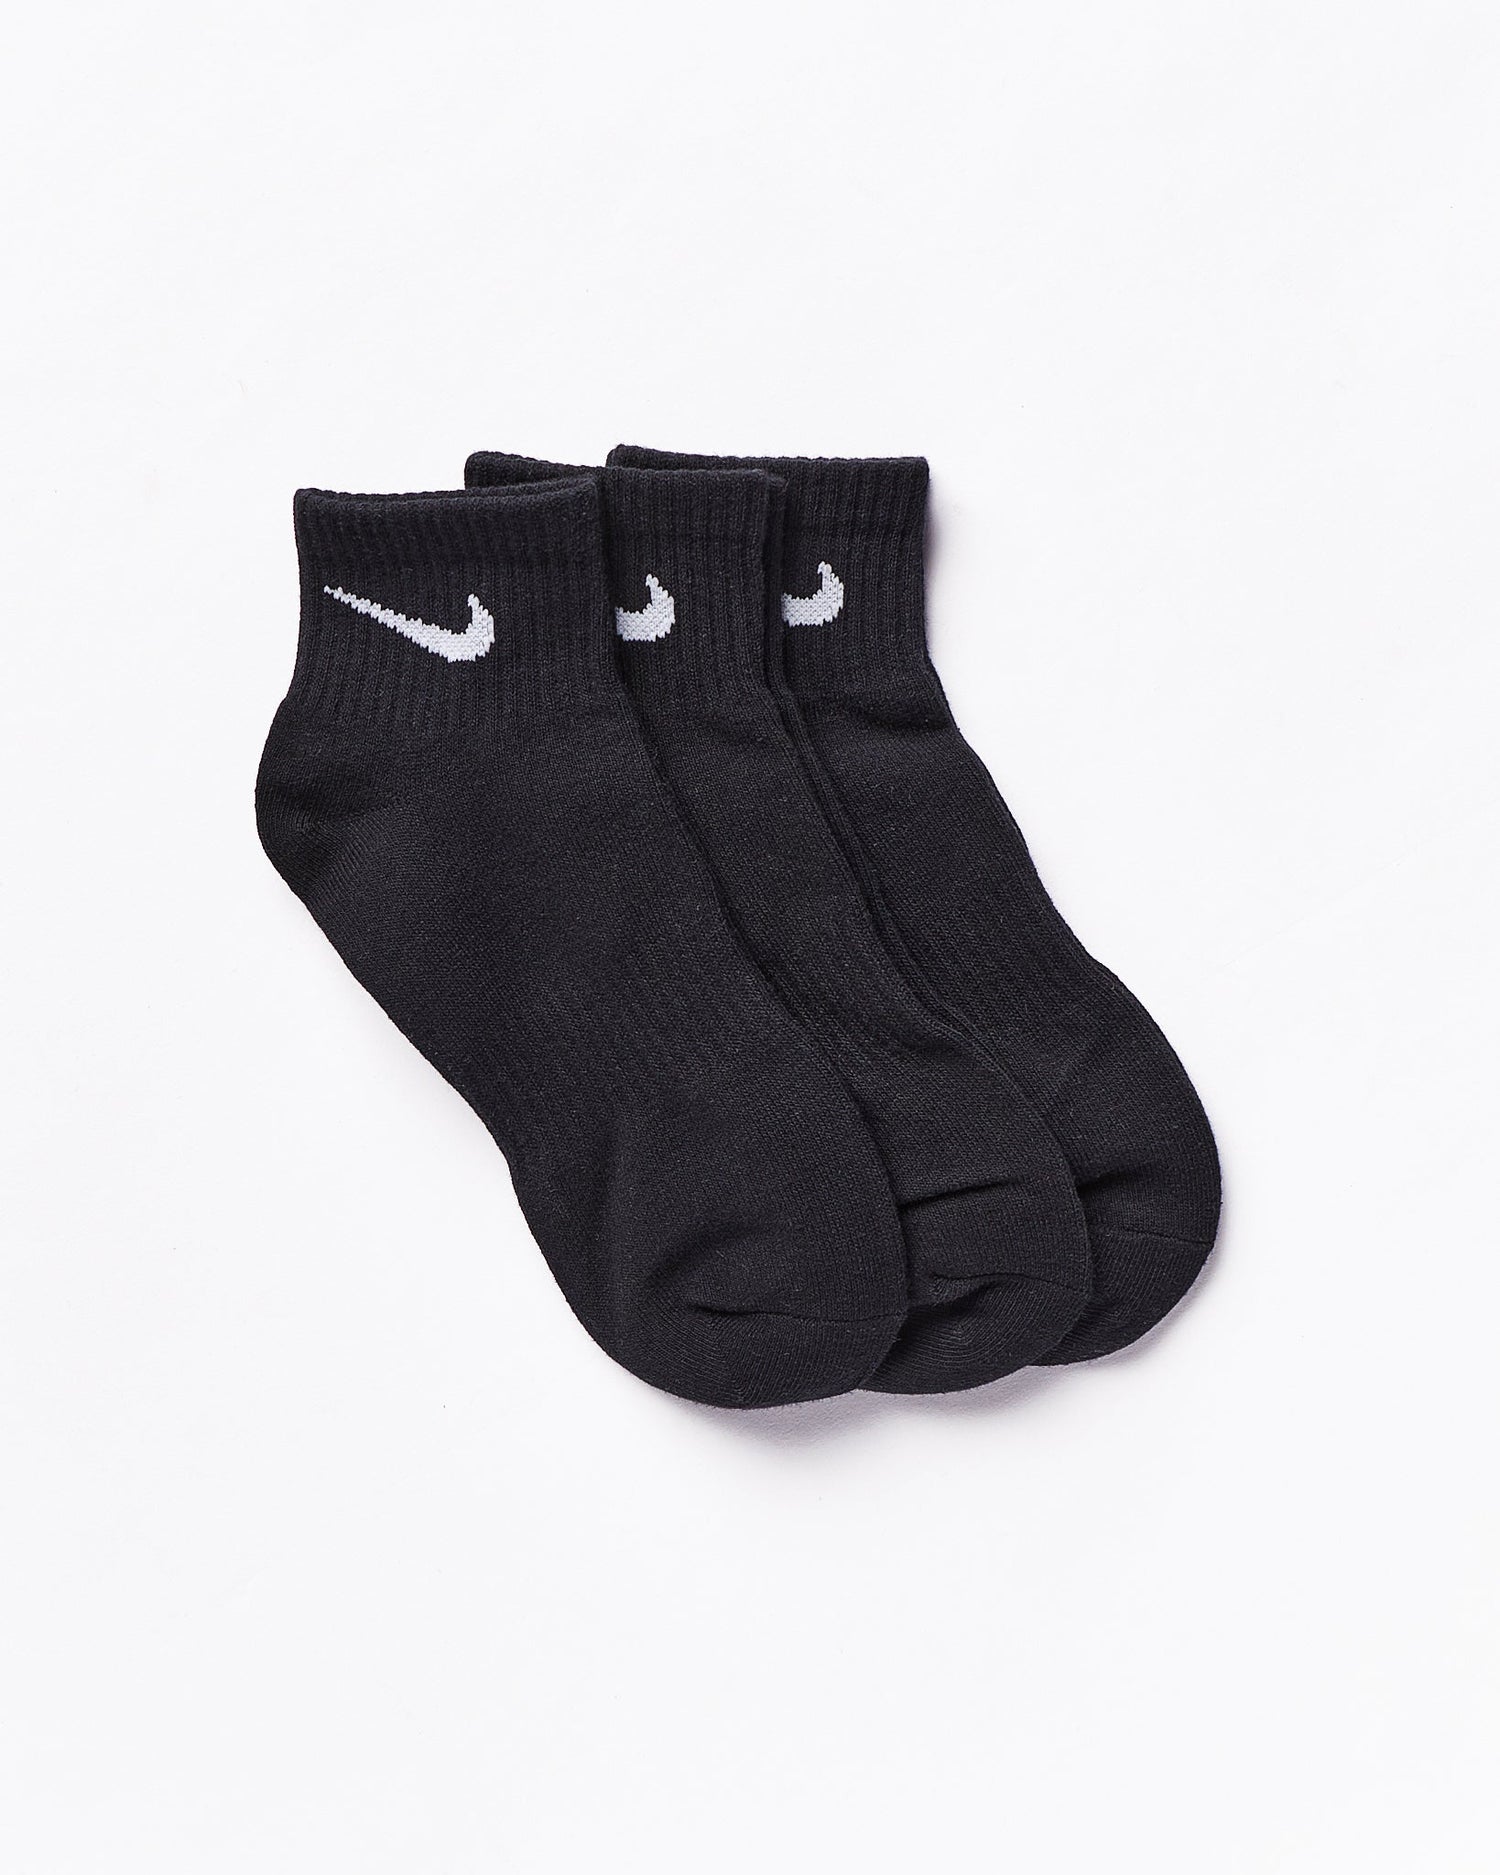 MOI OUTFIT-Cuff Logo Embroidered Quarter Socks 3 Pairs 8.90